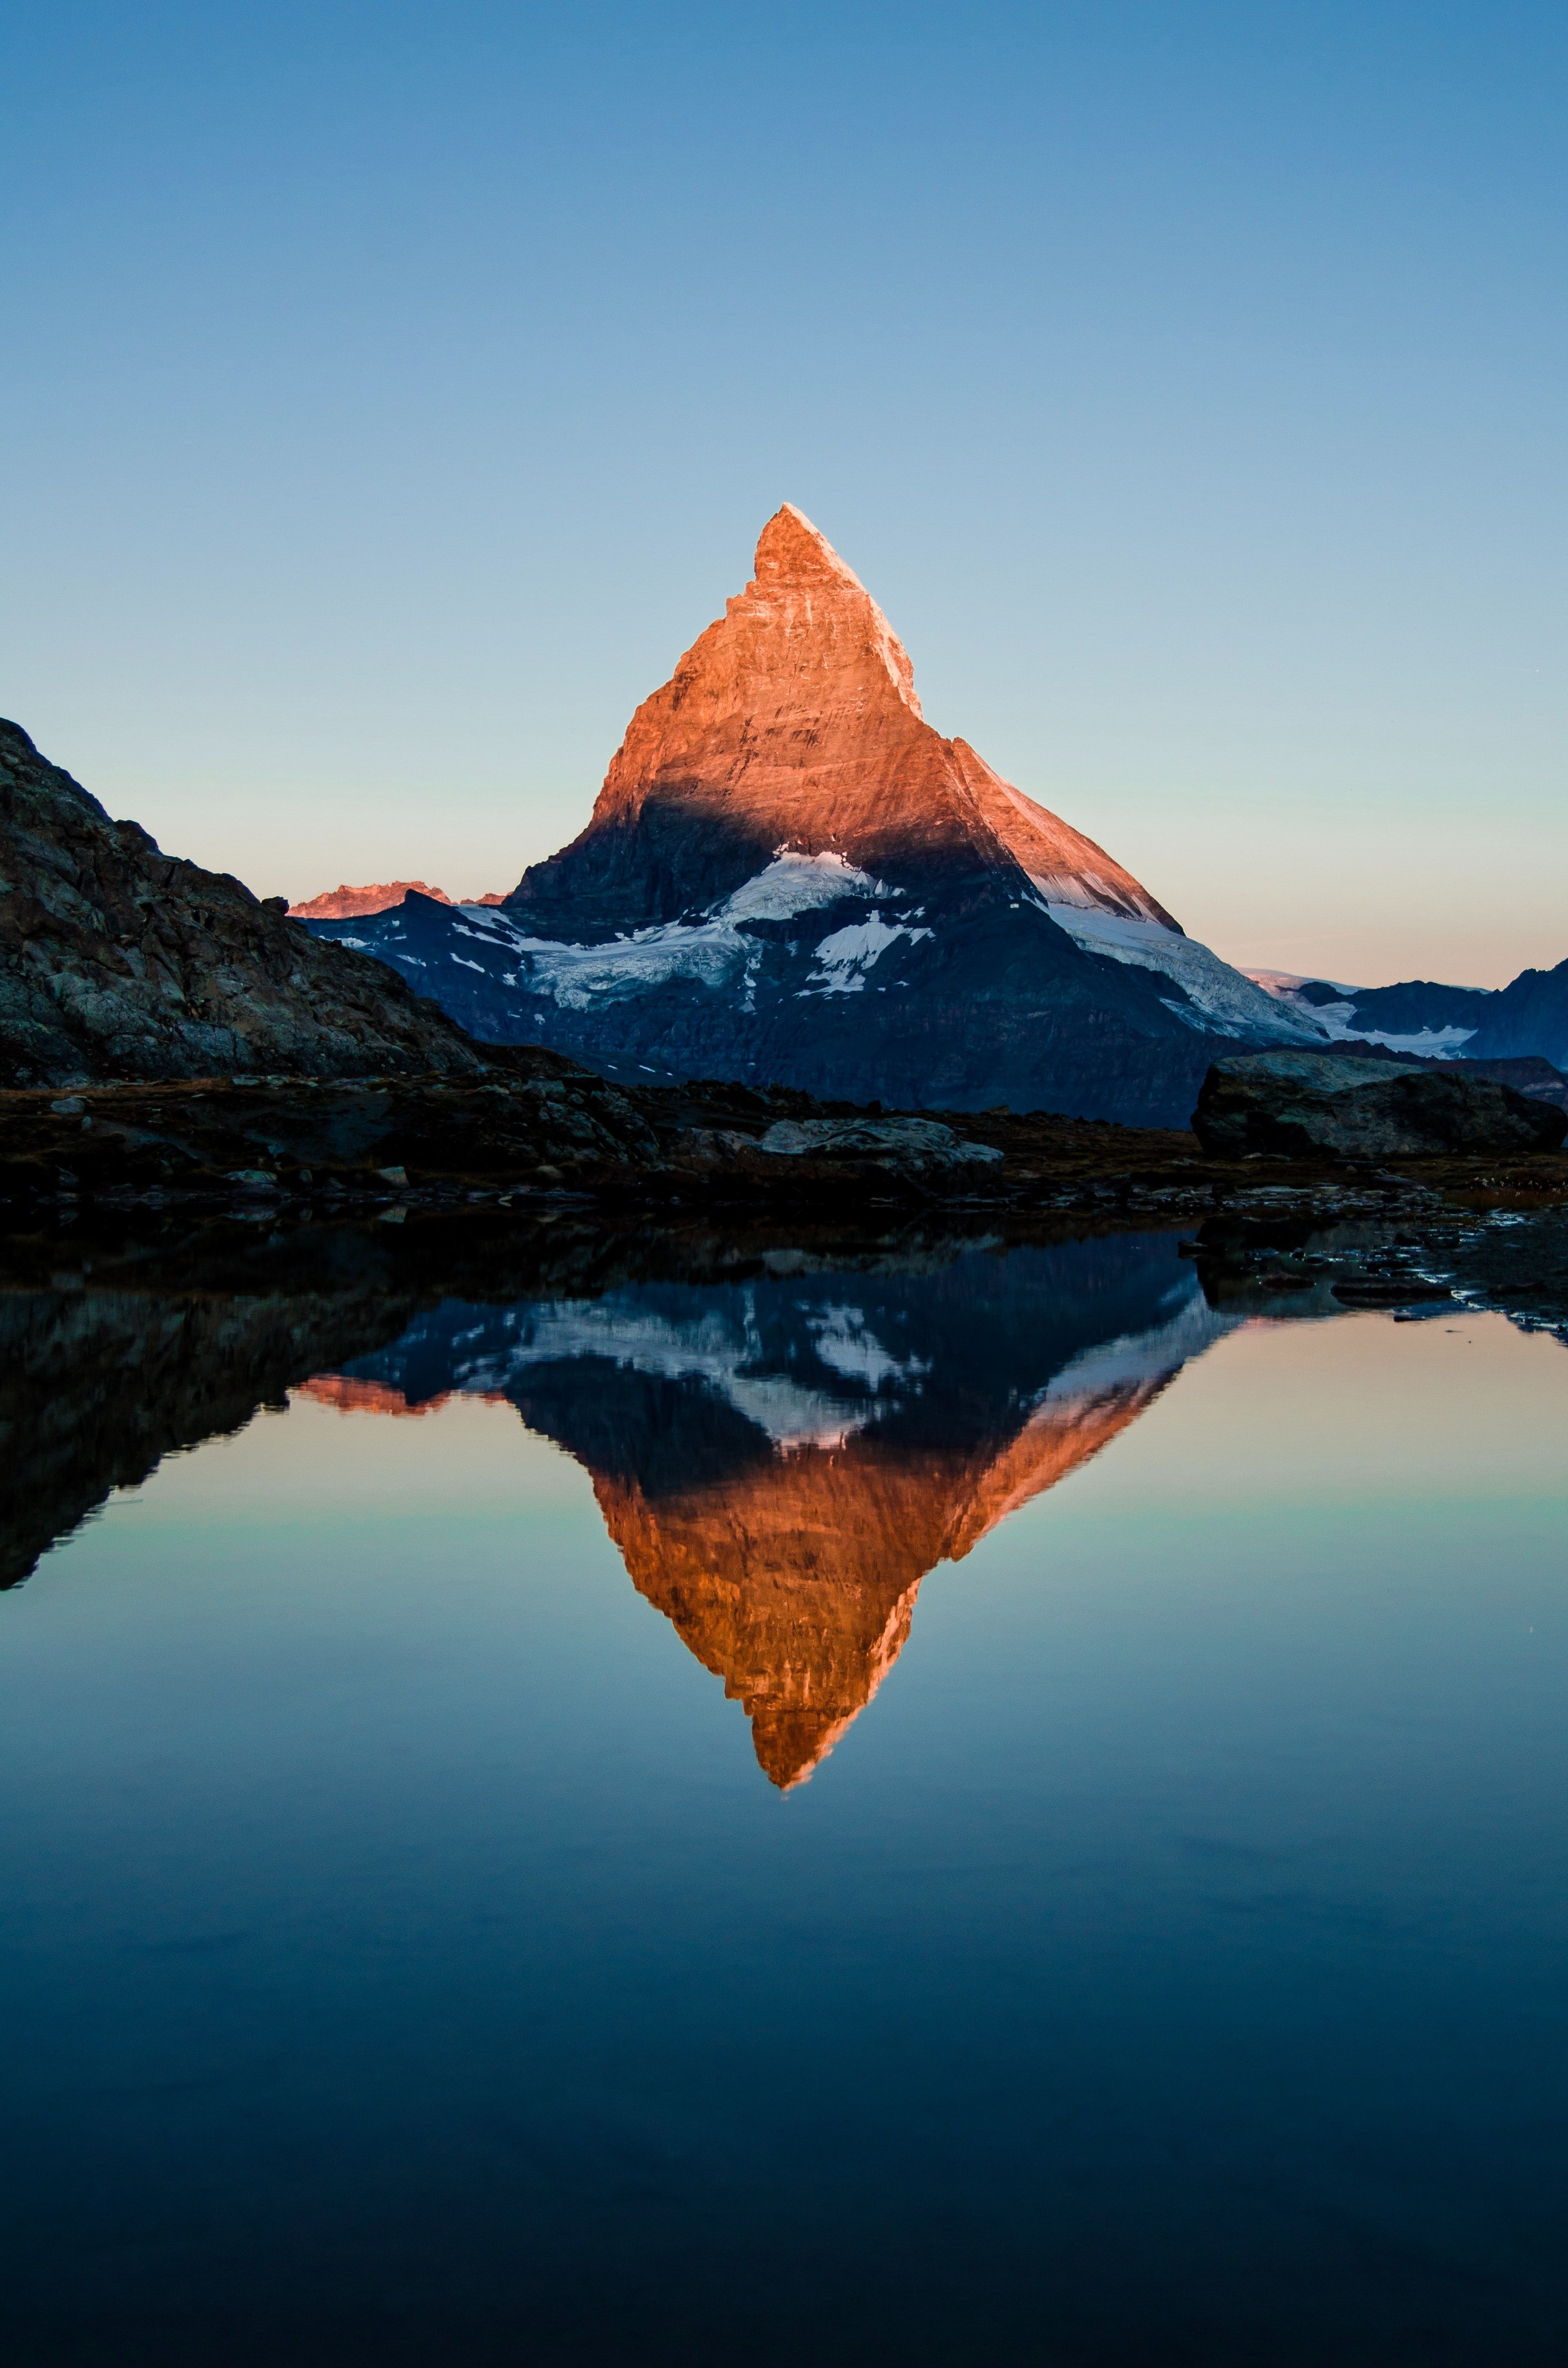 A mountain reflected in the water - Mountain